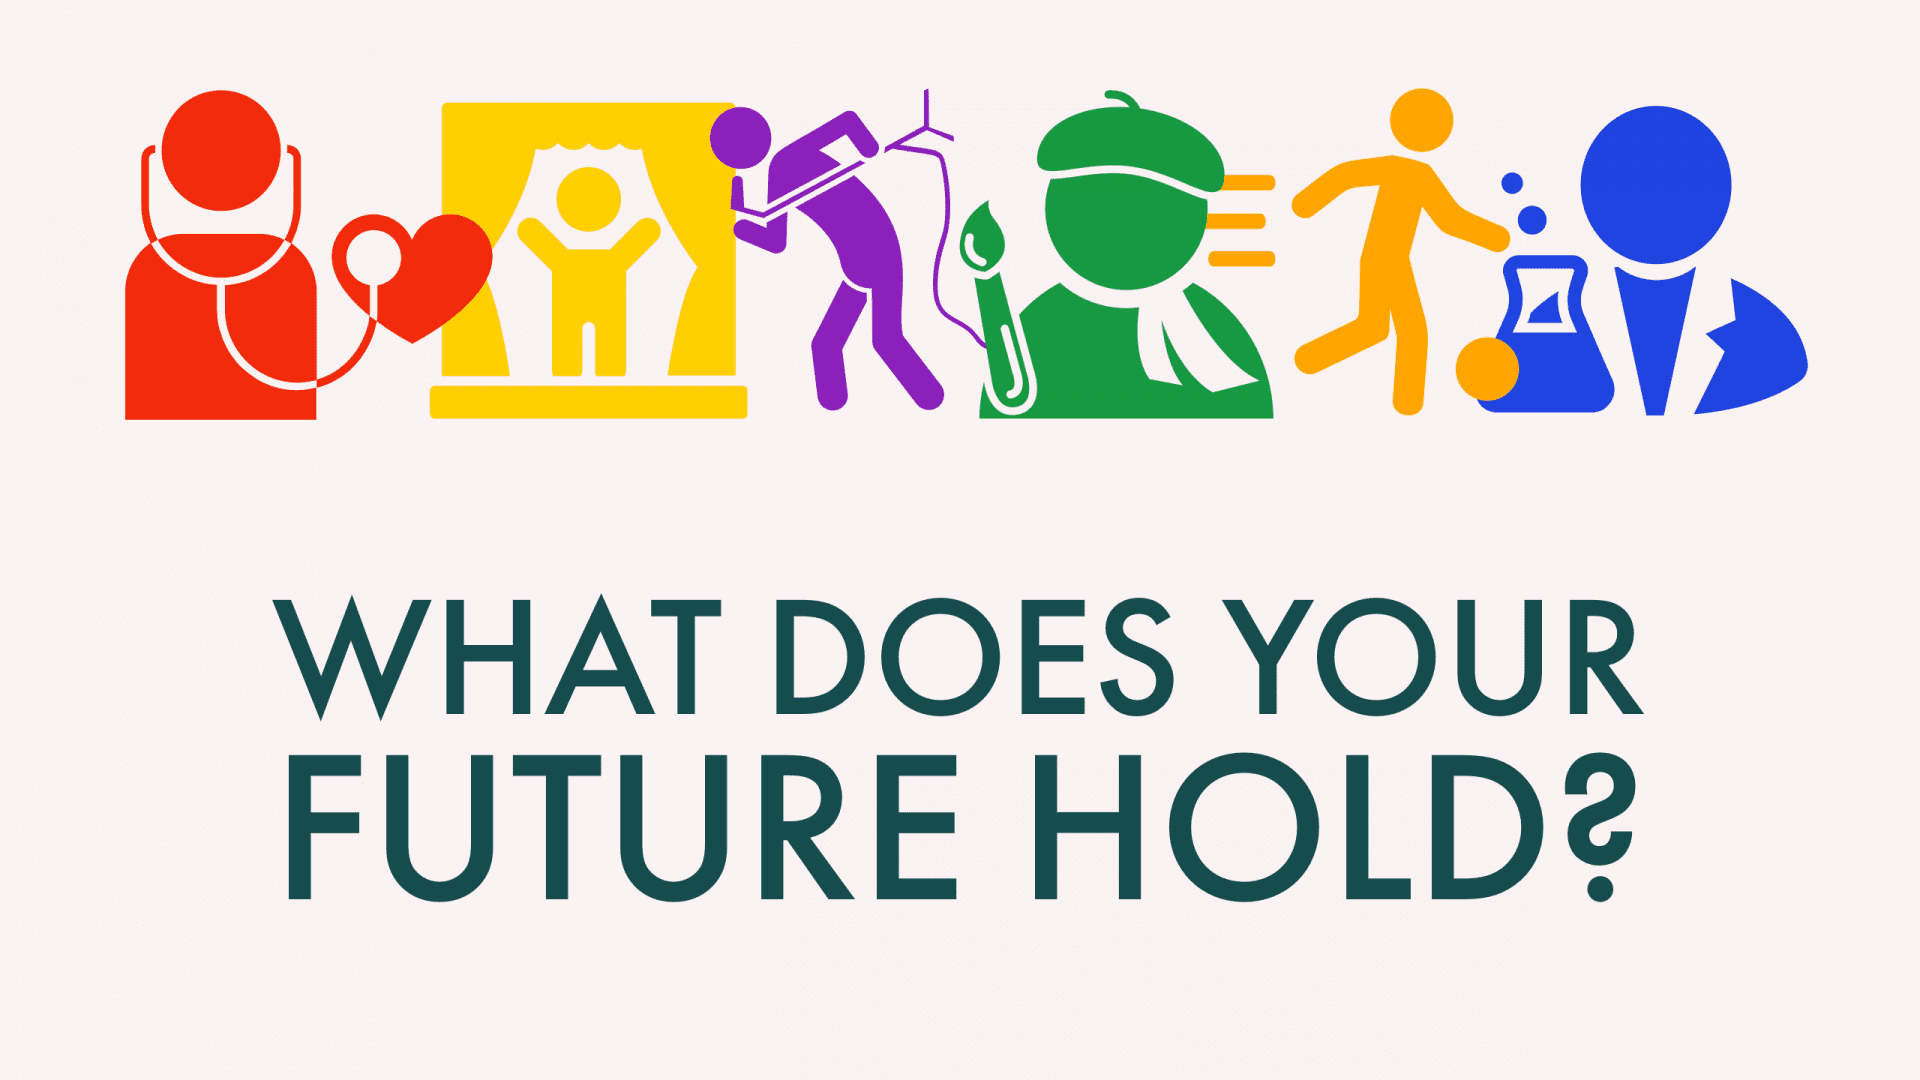 stick figures in various colors representing a doctor, actor, singer, artist, athlete, and scientist. text reads "What does your future hold?"